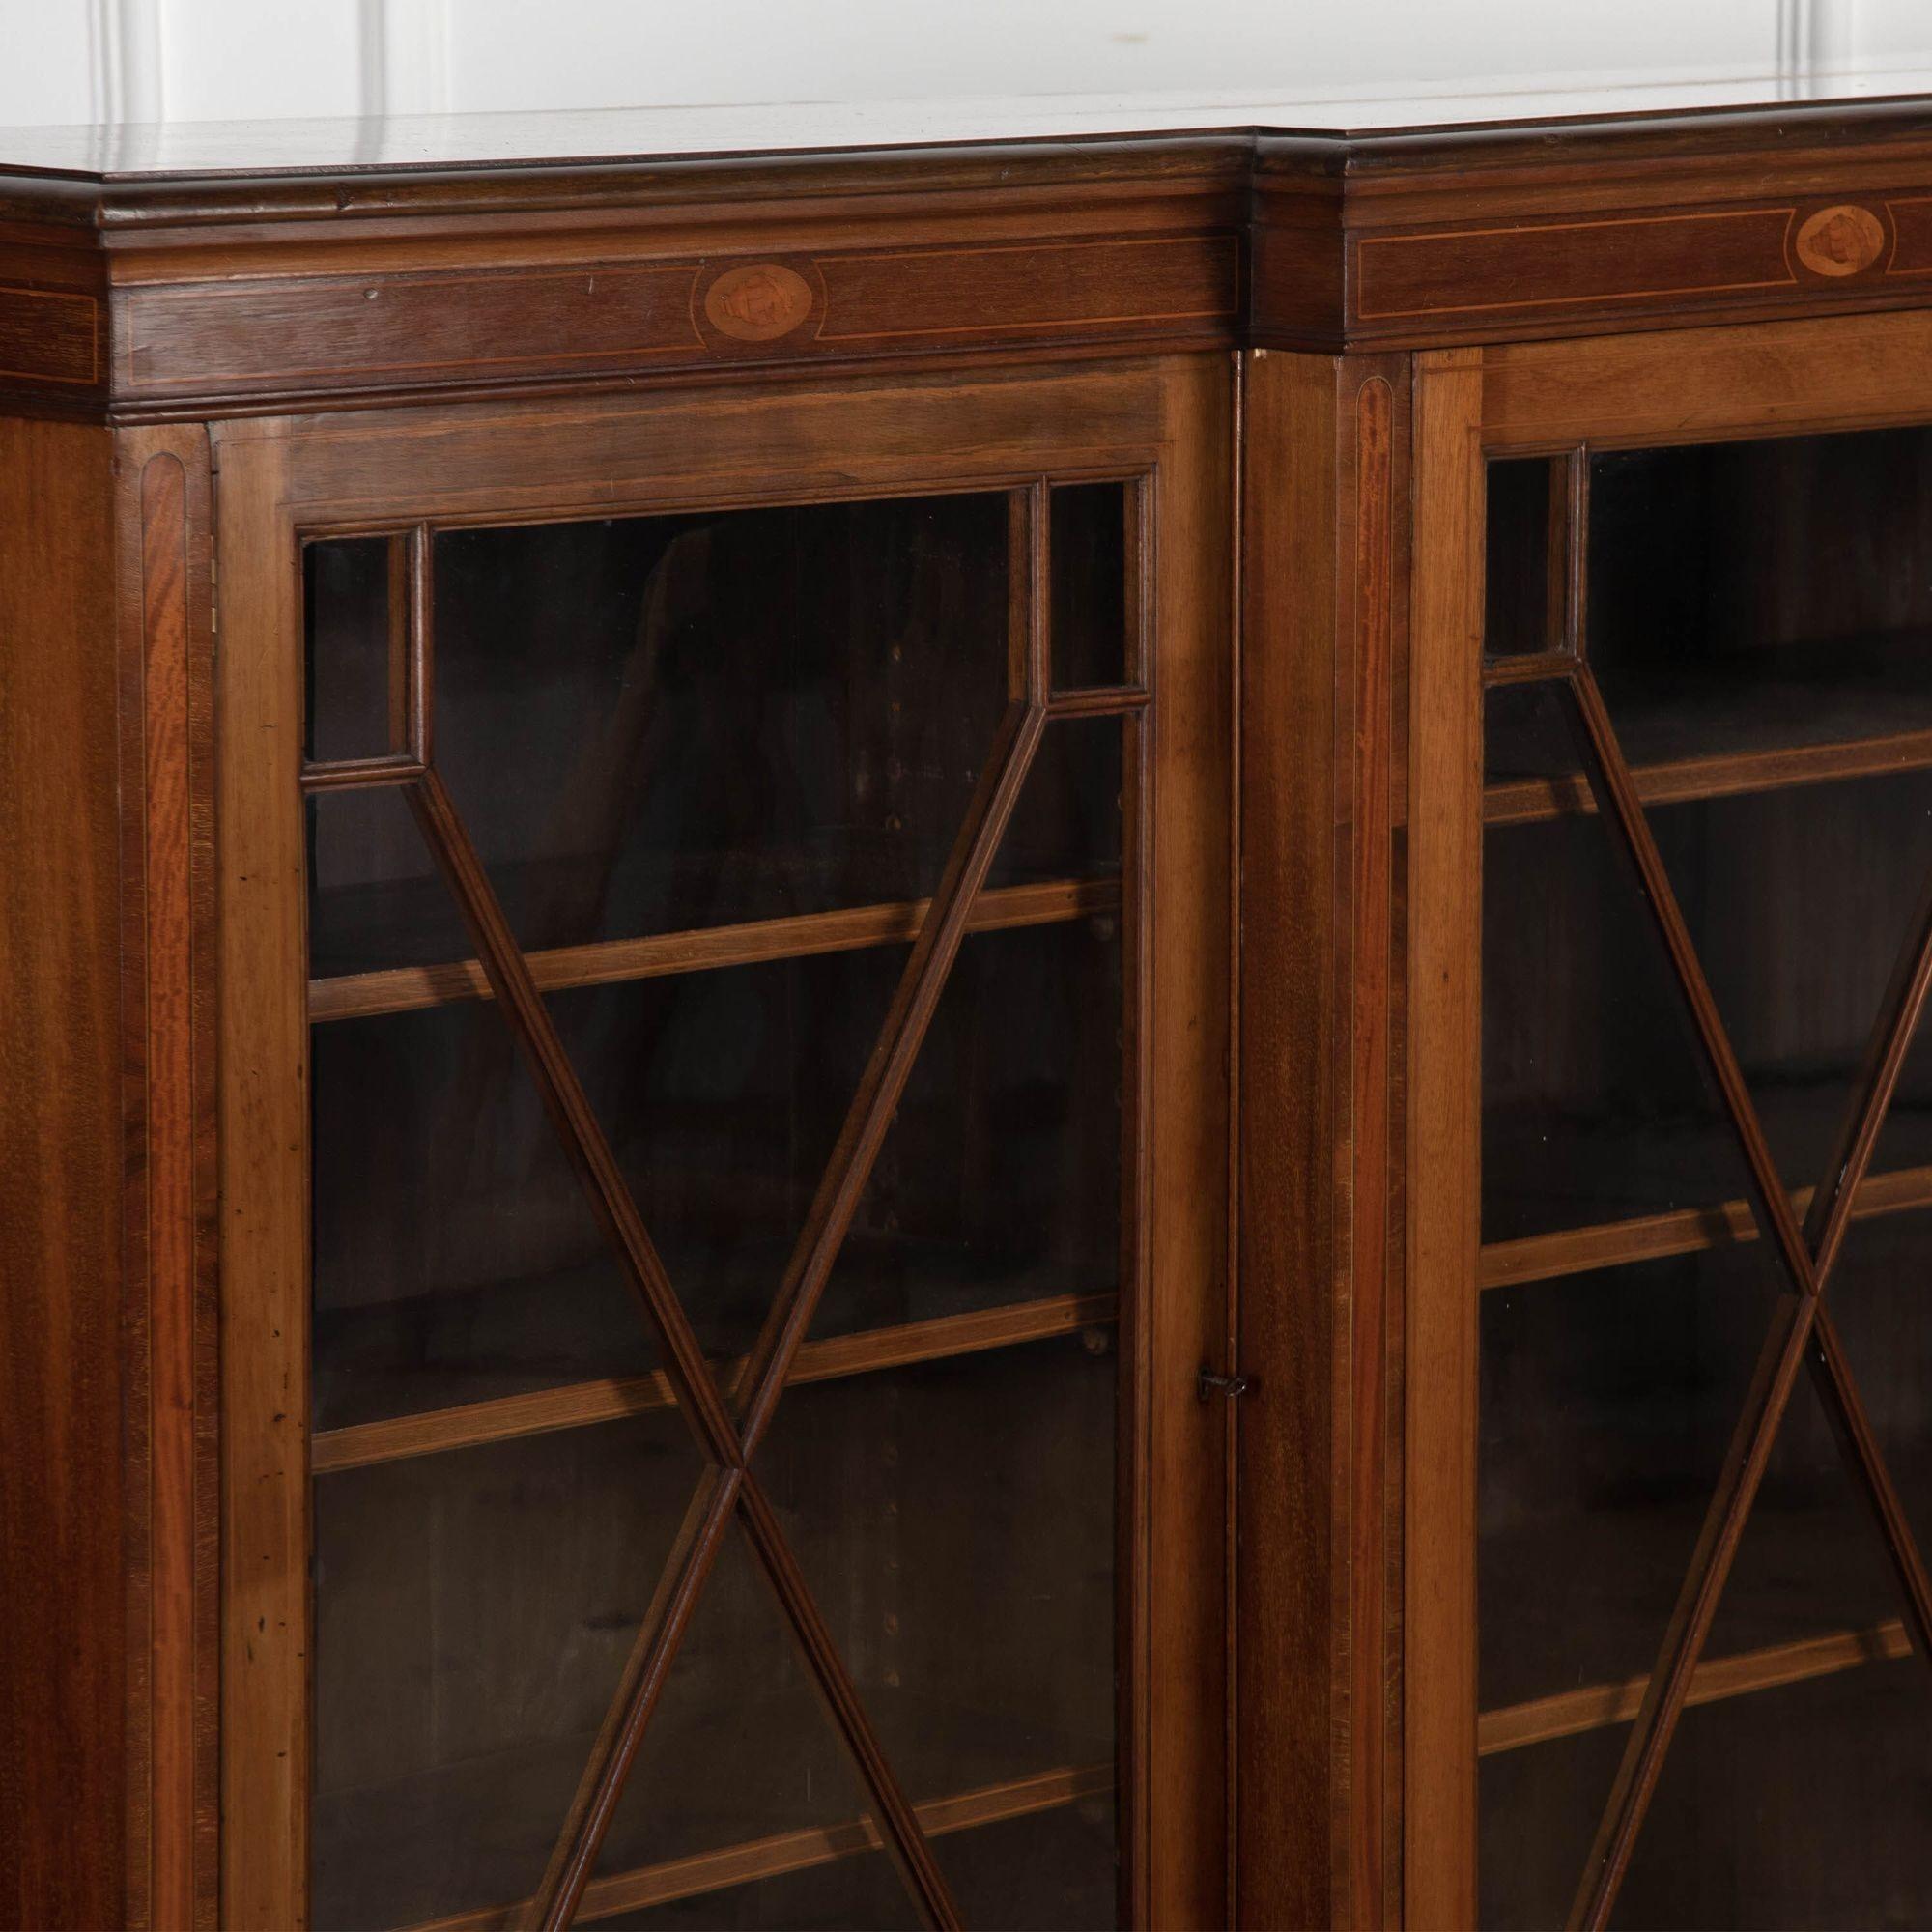 Great early 20th century mahogany and inlaid breakfront bookcase of 9ft proportions.
Of English origin, circa 1910 this four-door glazed bookcase opens to reveal three fully adjustable shelves in each section.
This piece has been cleaned and